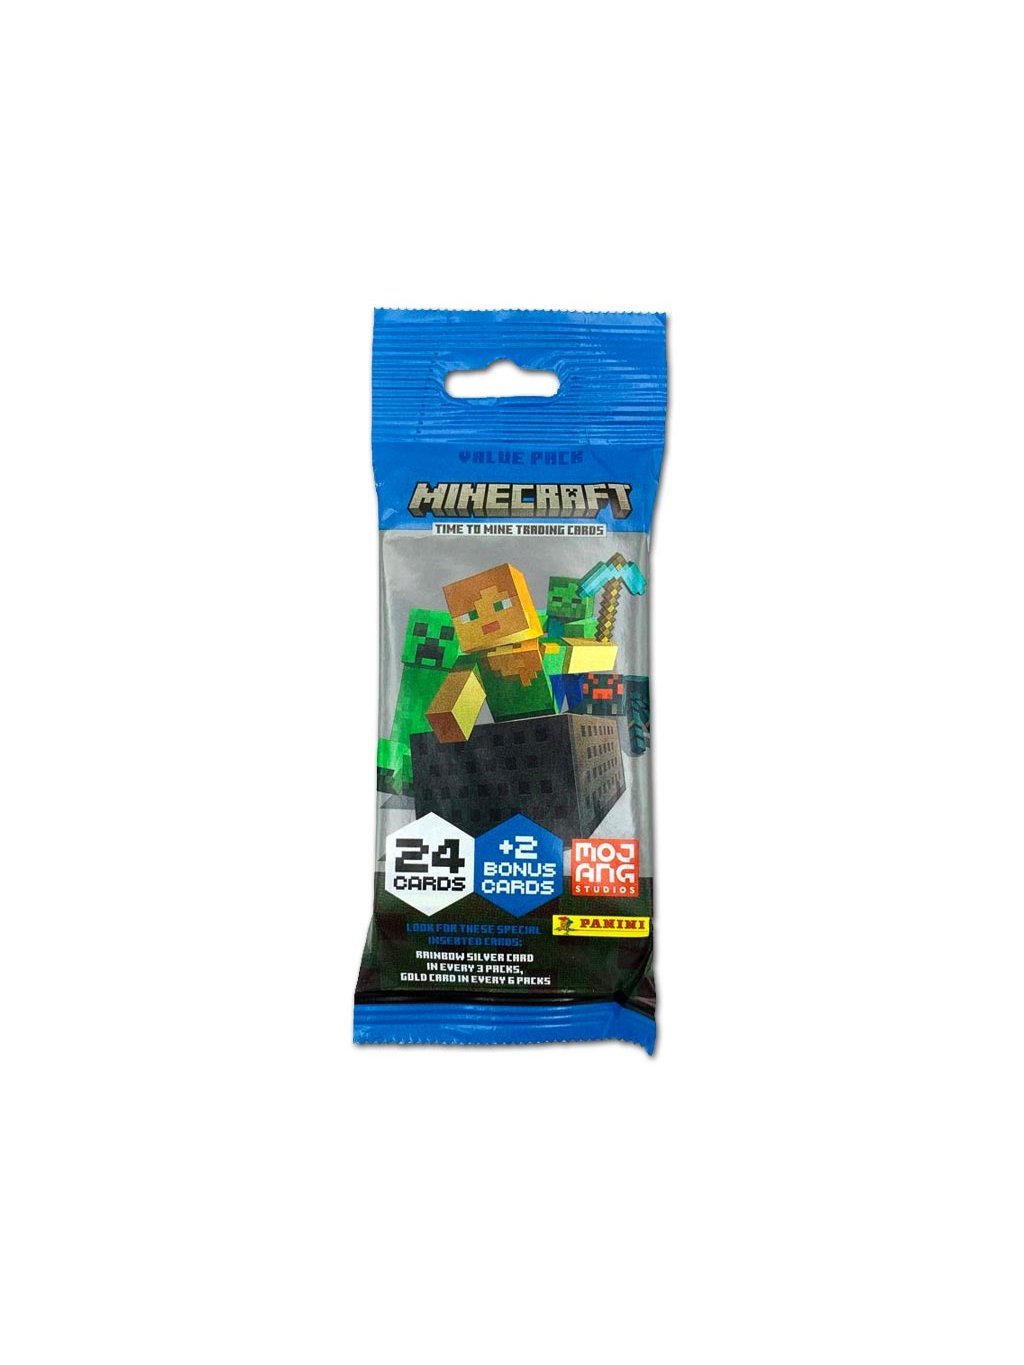 panini minecraft time to mine trading cards fat pack